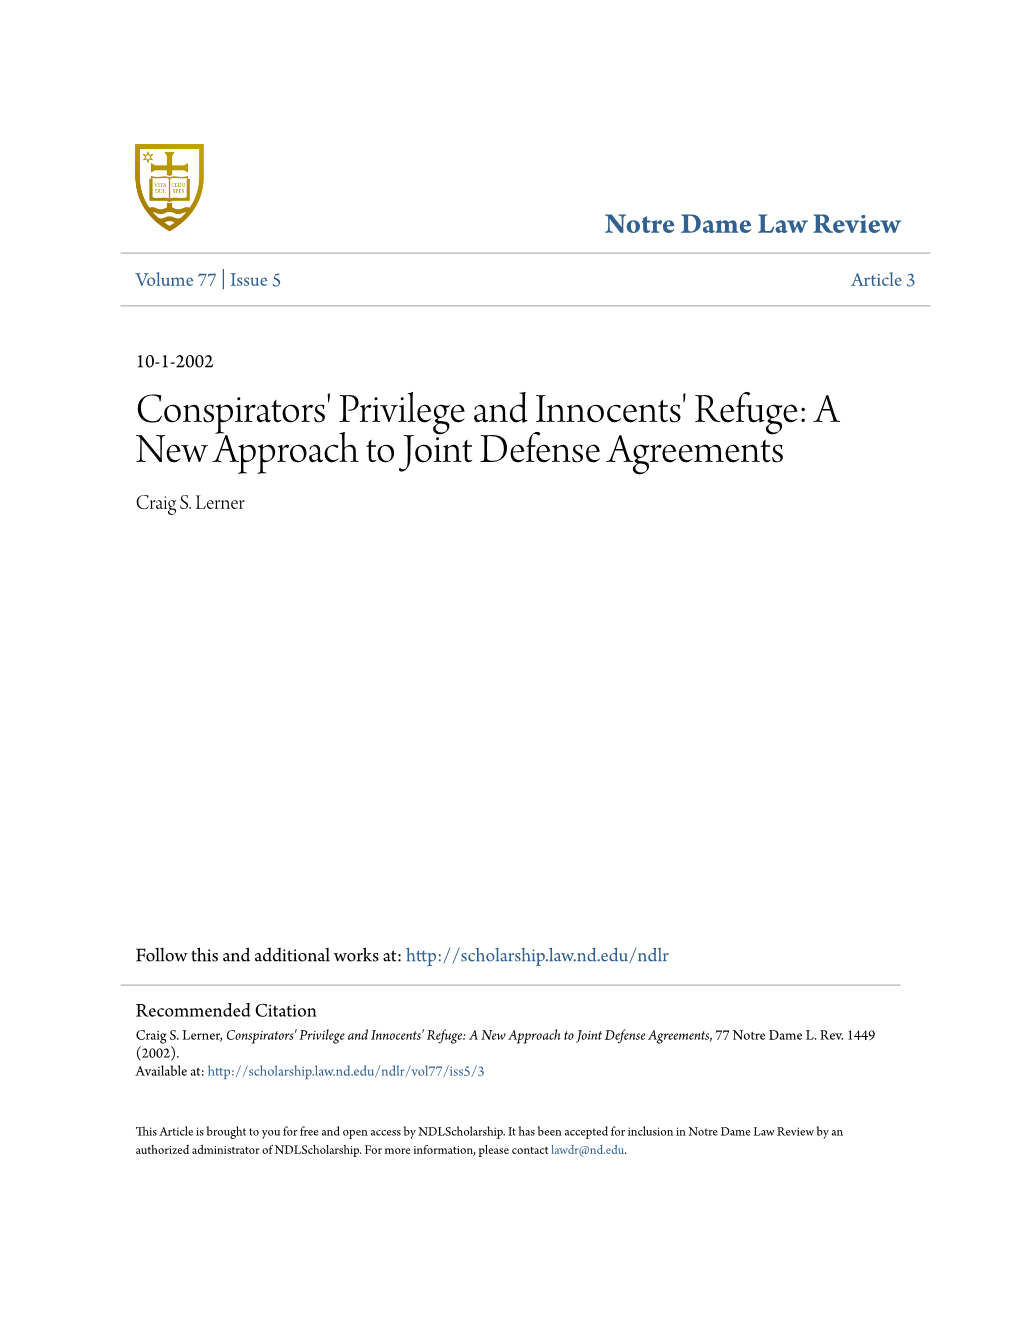 A New Approach to Joint Defense Agreements Craig S